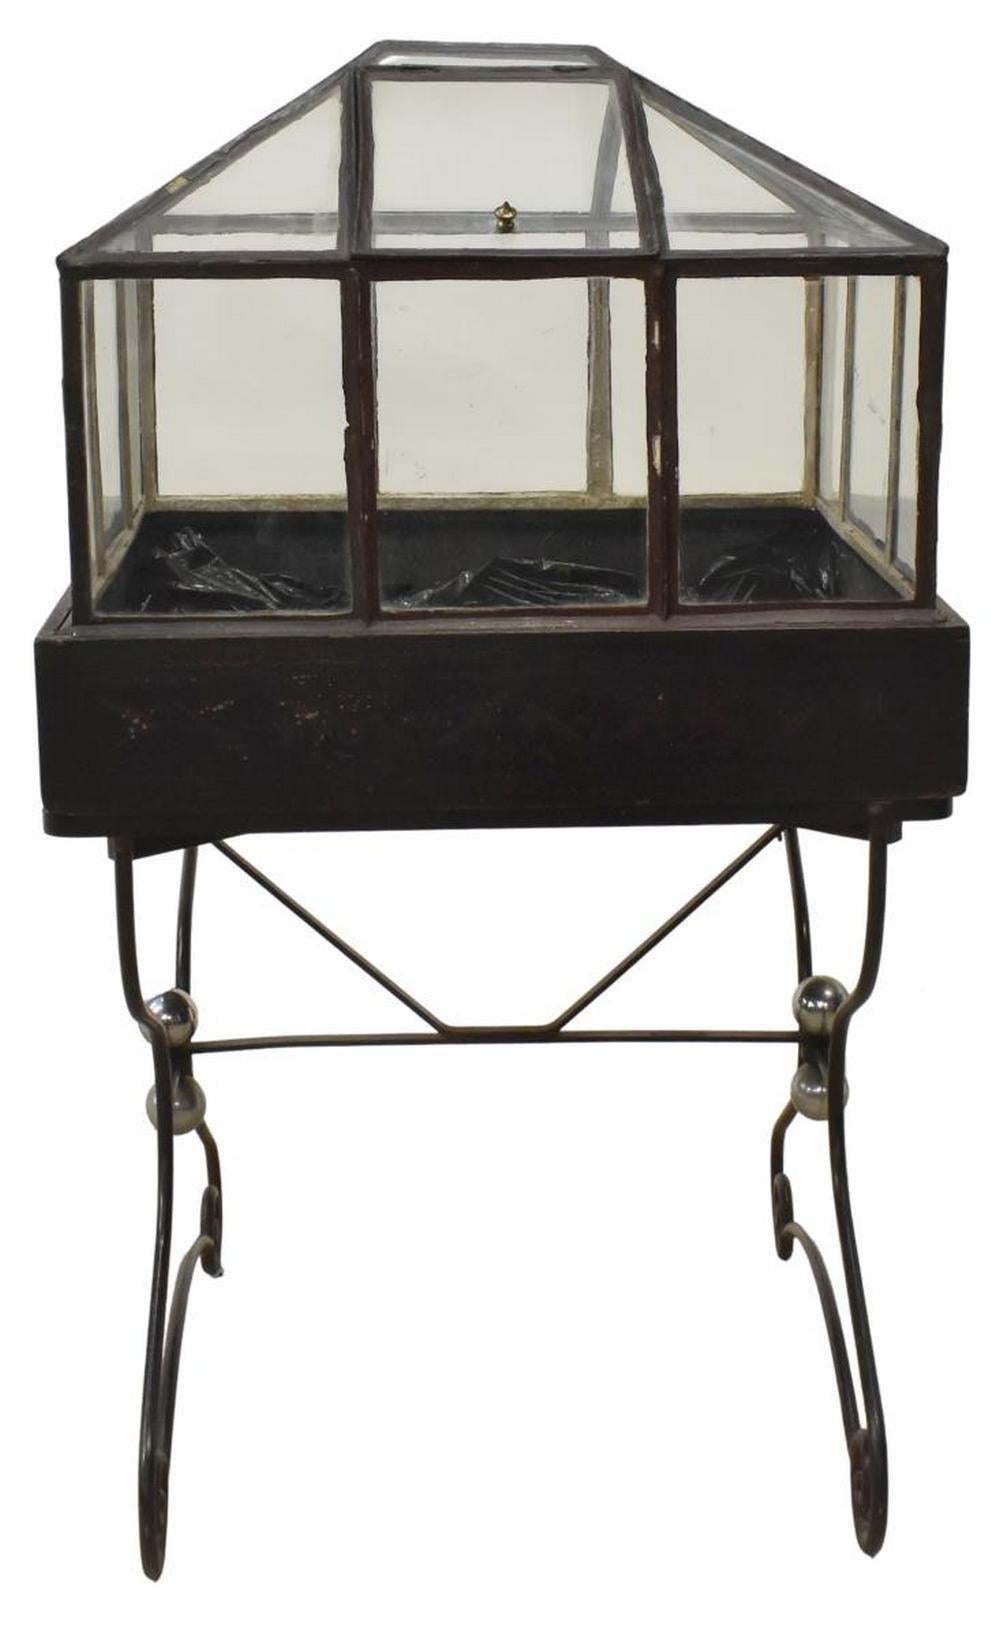 Victorian Wardian case/ terrarium, glazed case with pitched roof, hinged access door, on scrolled wrought iron stand, approximately 53